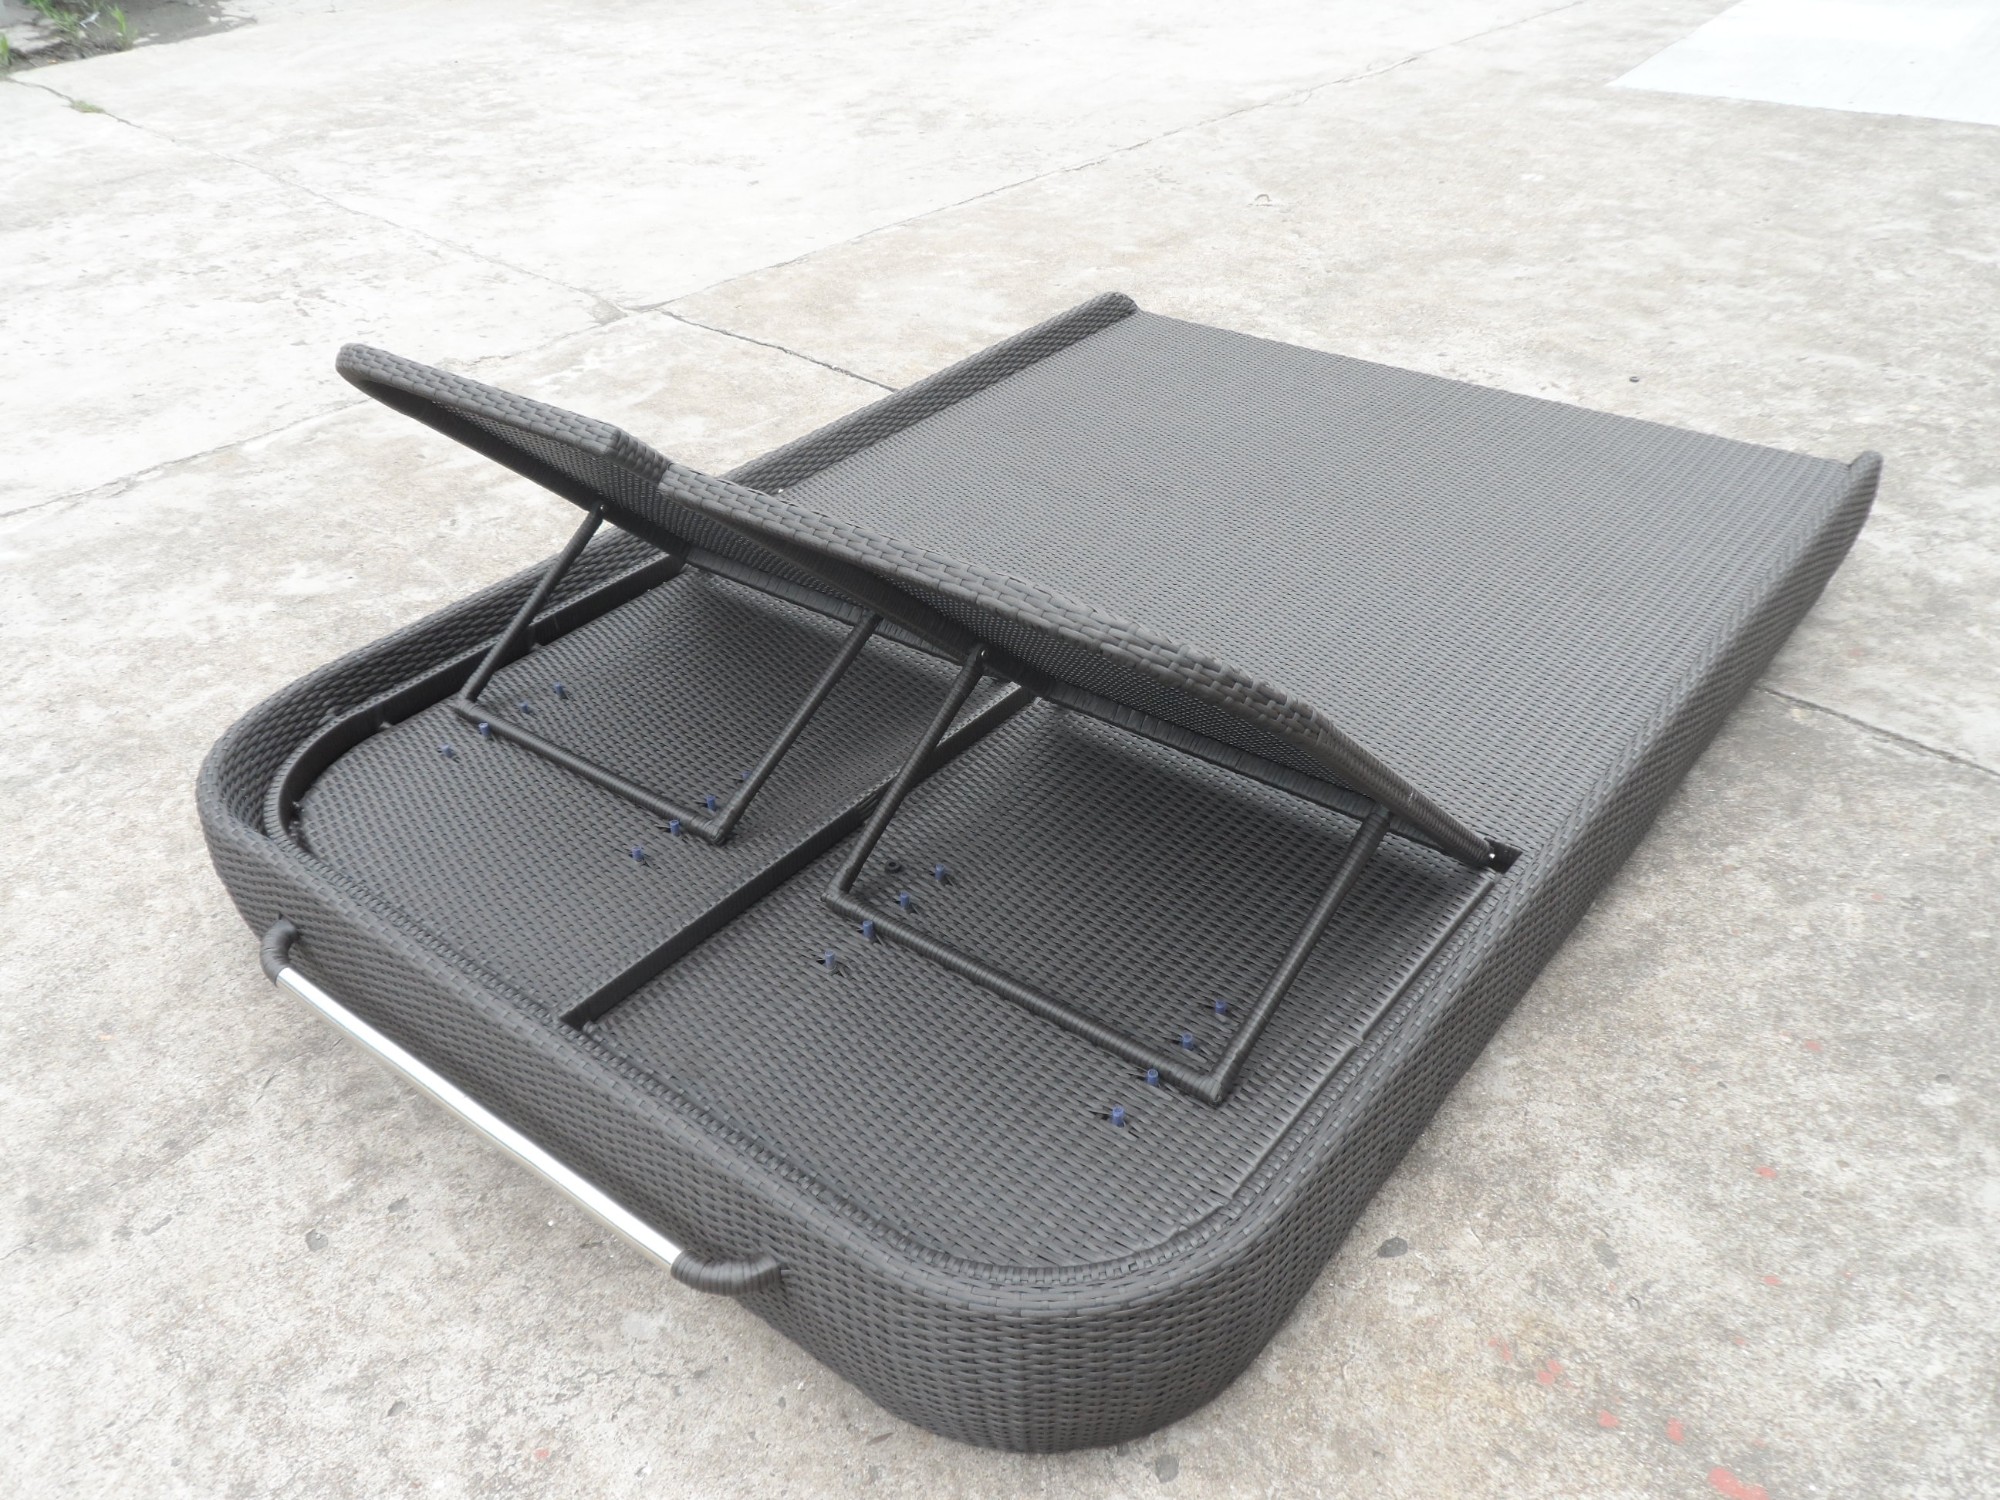 double rattan sun chaise lounger Manufacturers, double rattan sun chaise lounger Factory, Supply double rattan sun chaise lounger